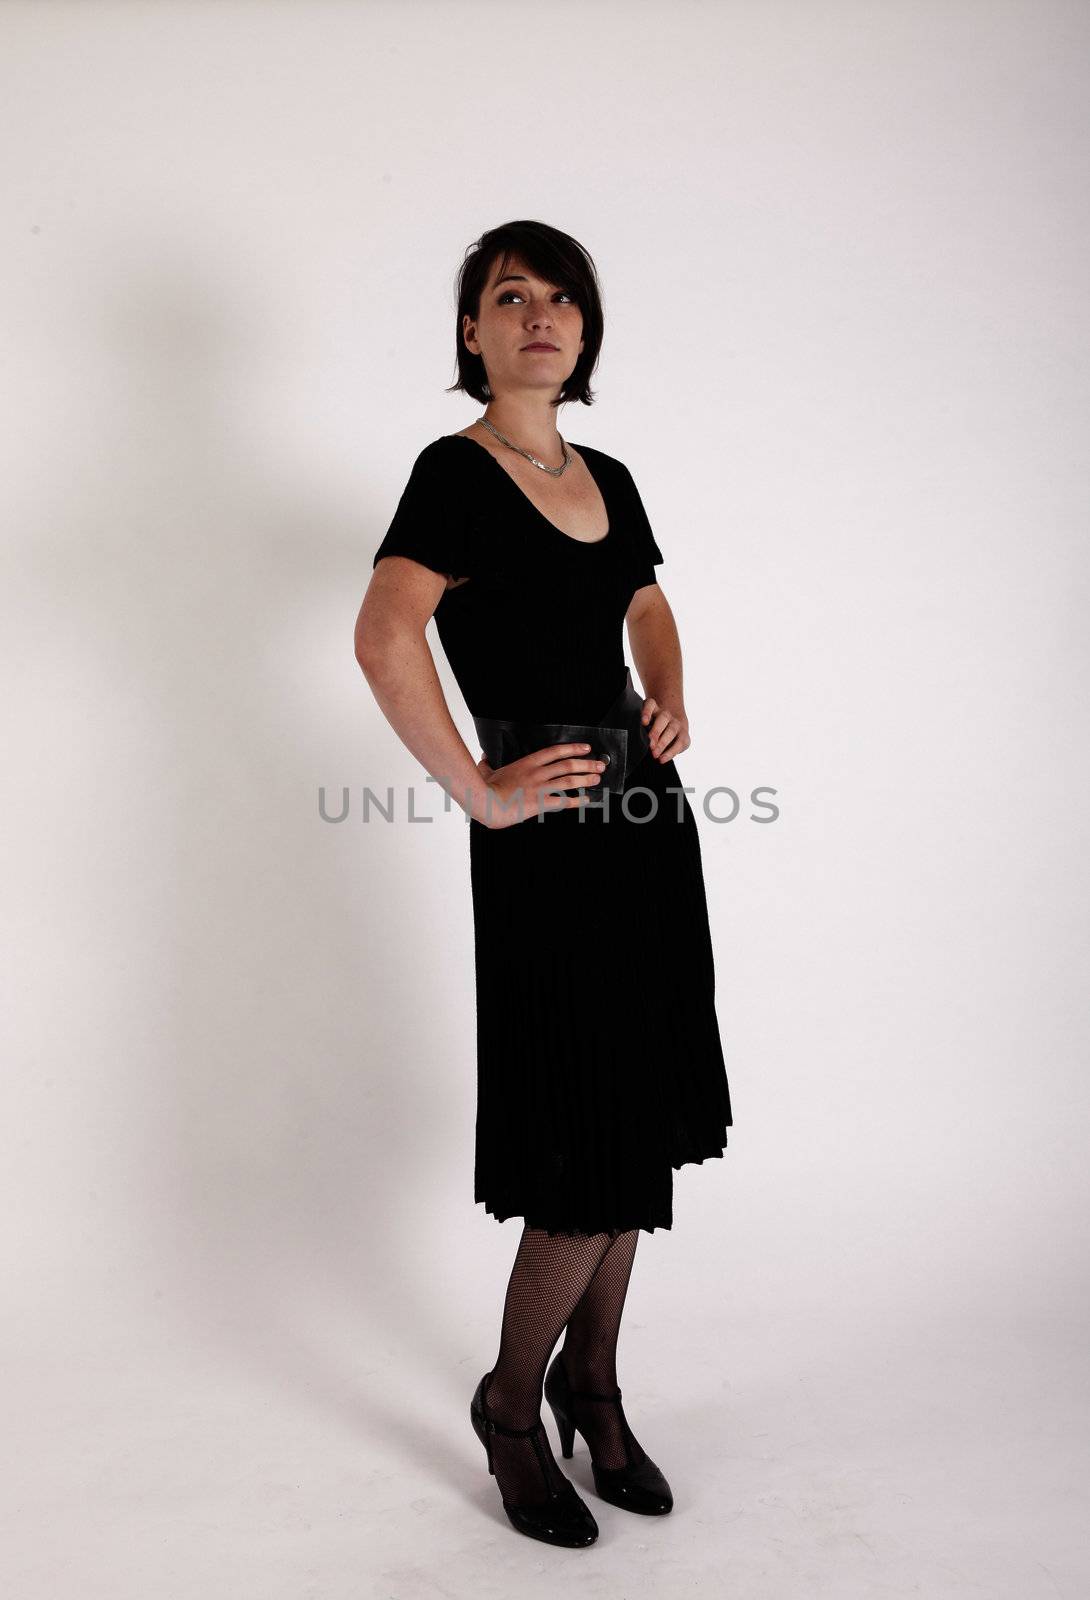 a young woman in strict black dress in studio looking like widow or nanny